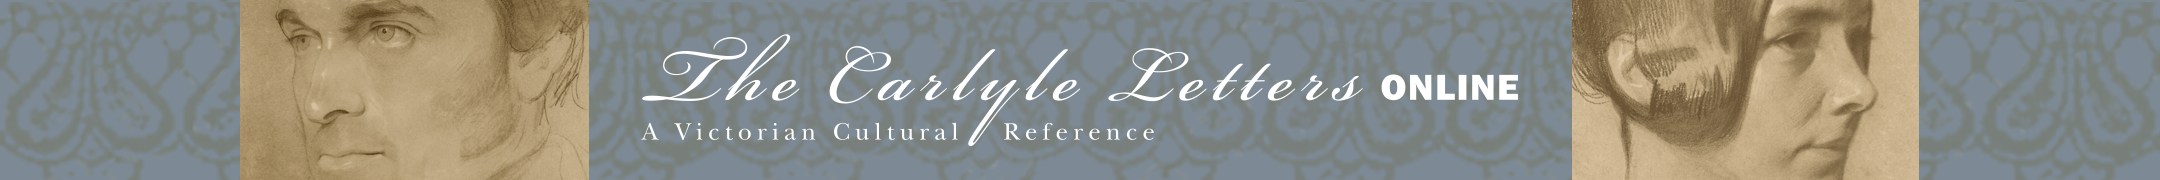 The Carlyle Letters Online